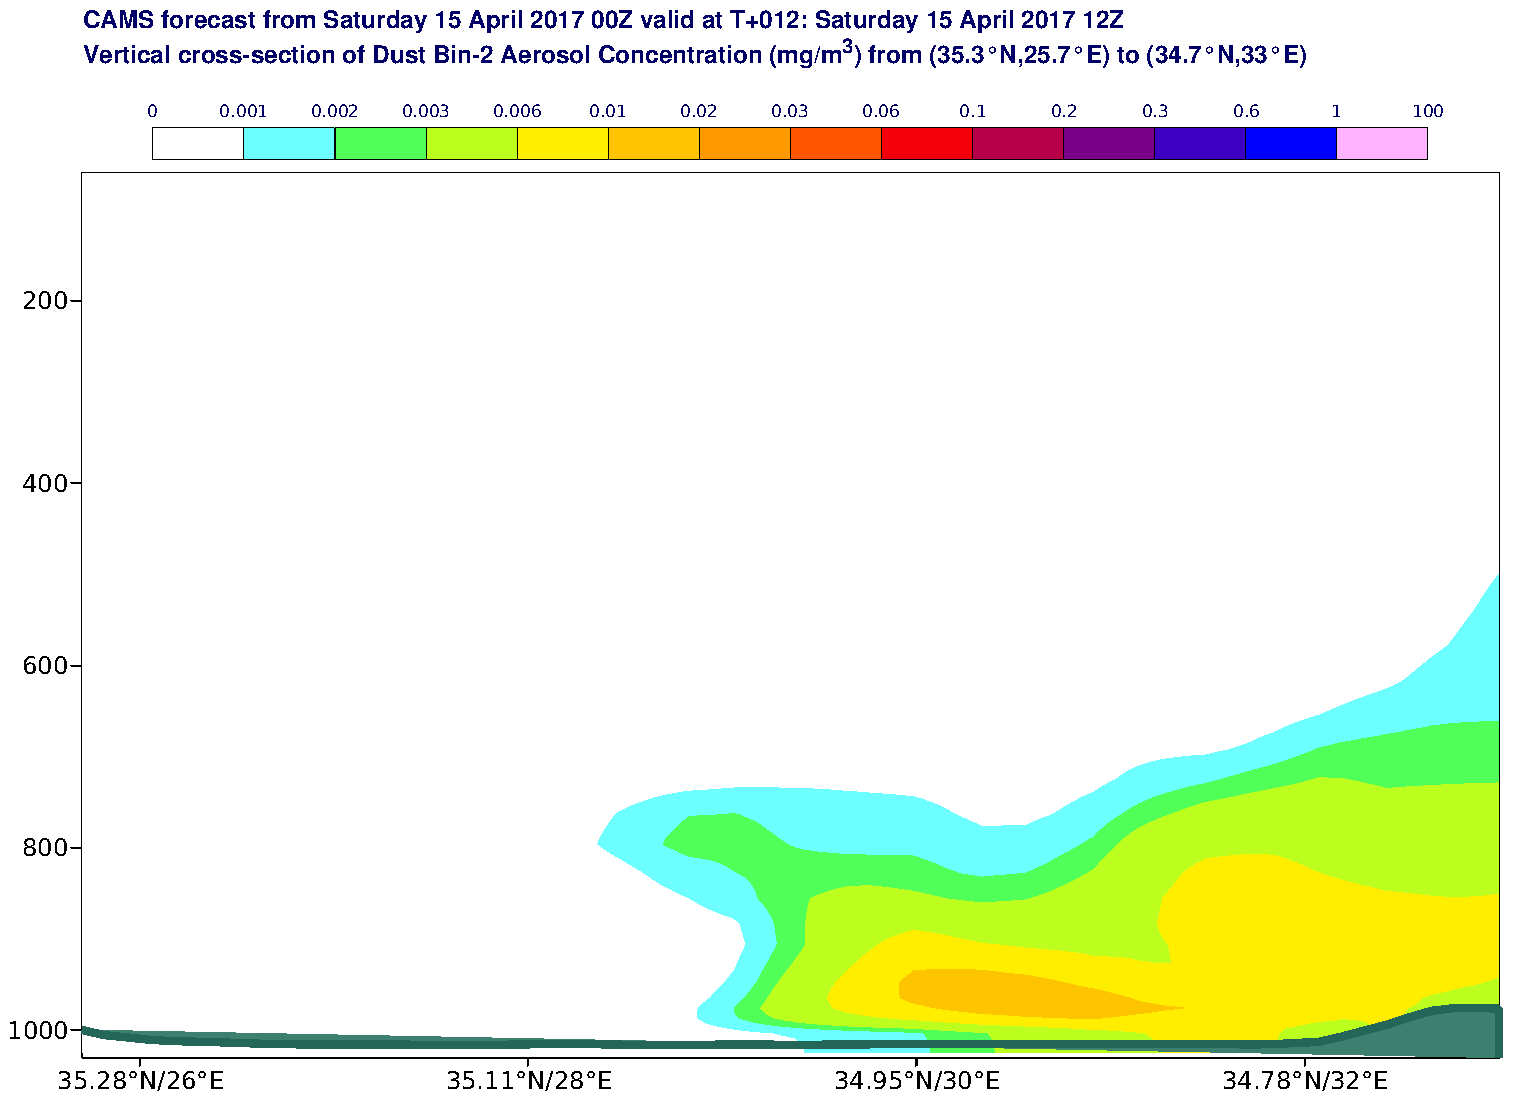 Vertical cross-section of Dust Bin-2 Aerosol Concentration (mg/m3) valid at T12 - 2017-04-15 12:00